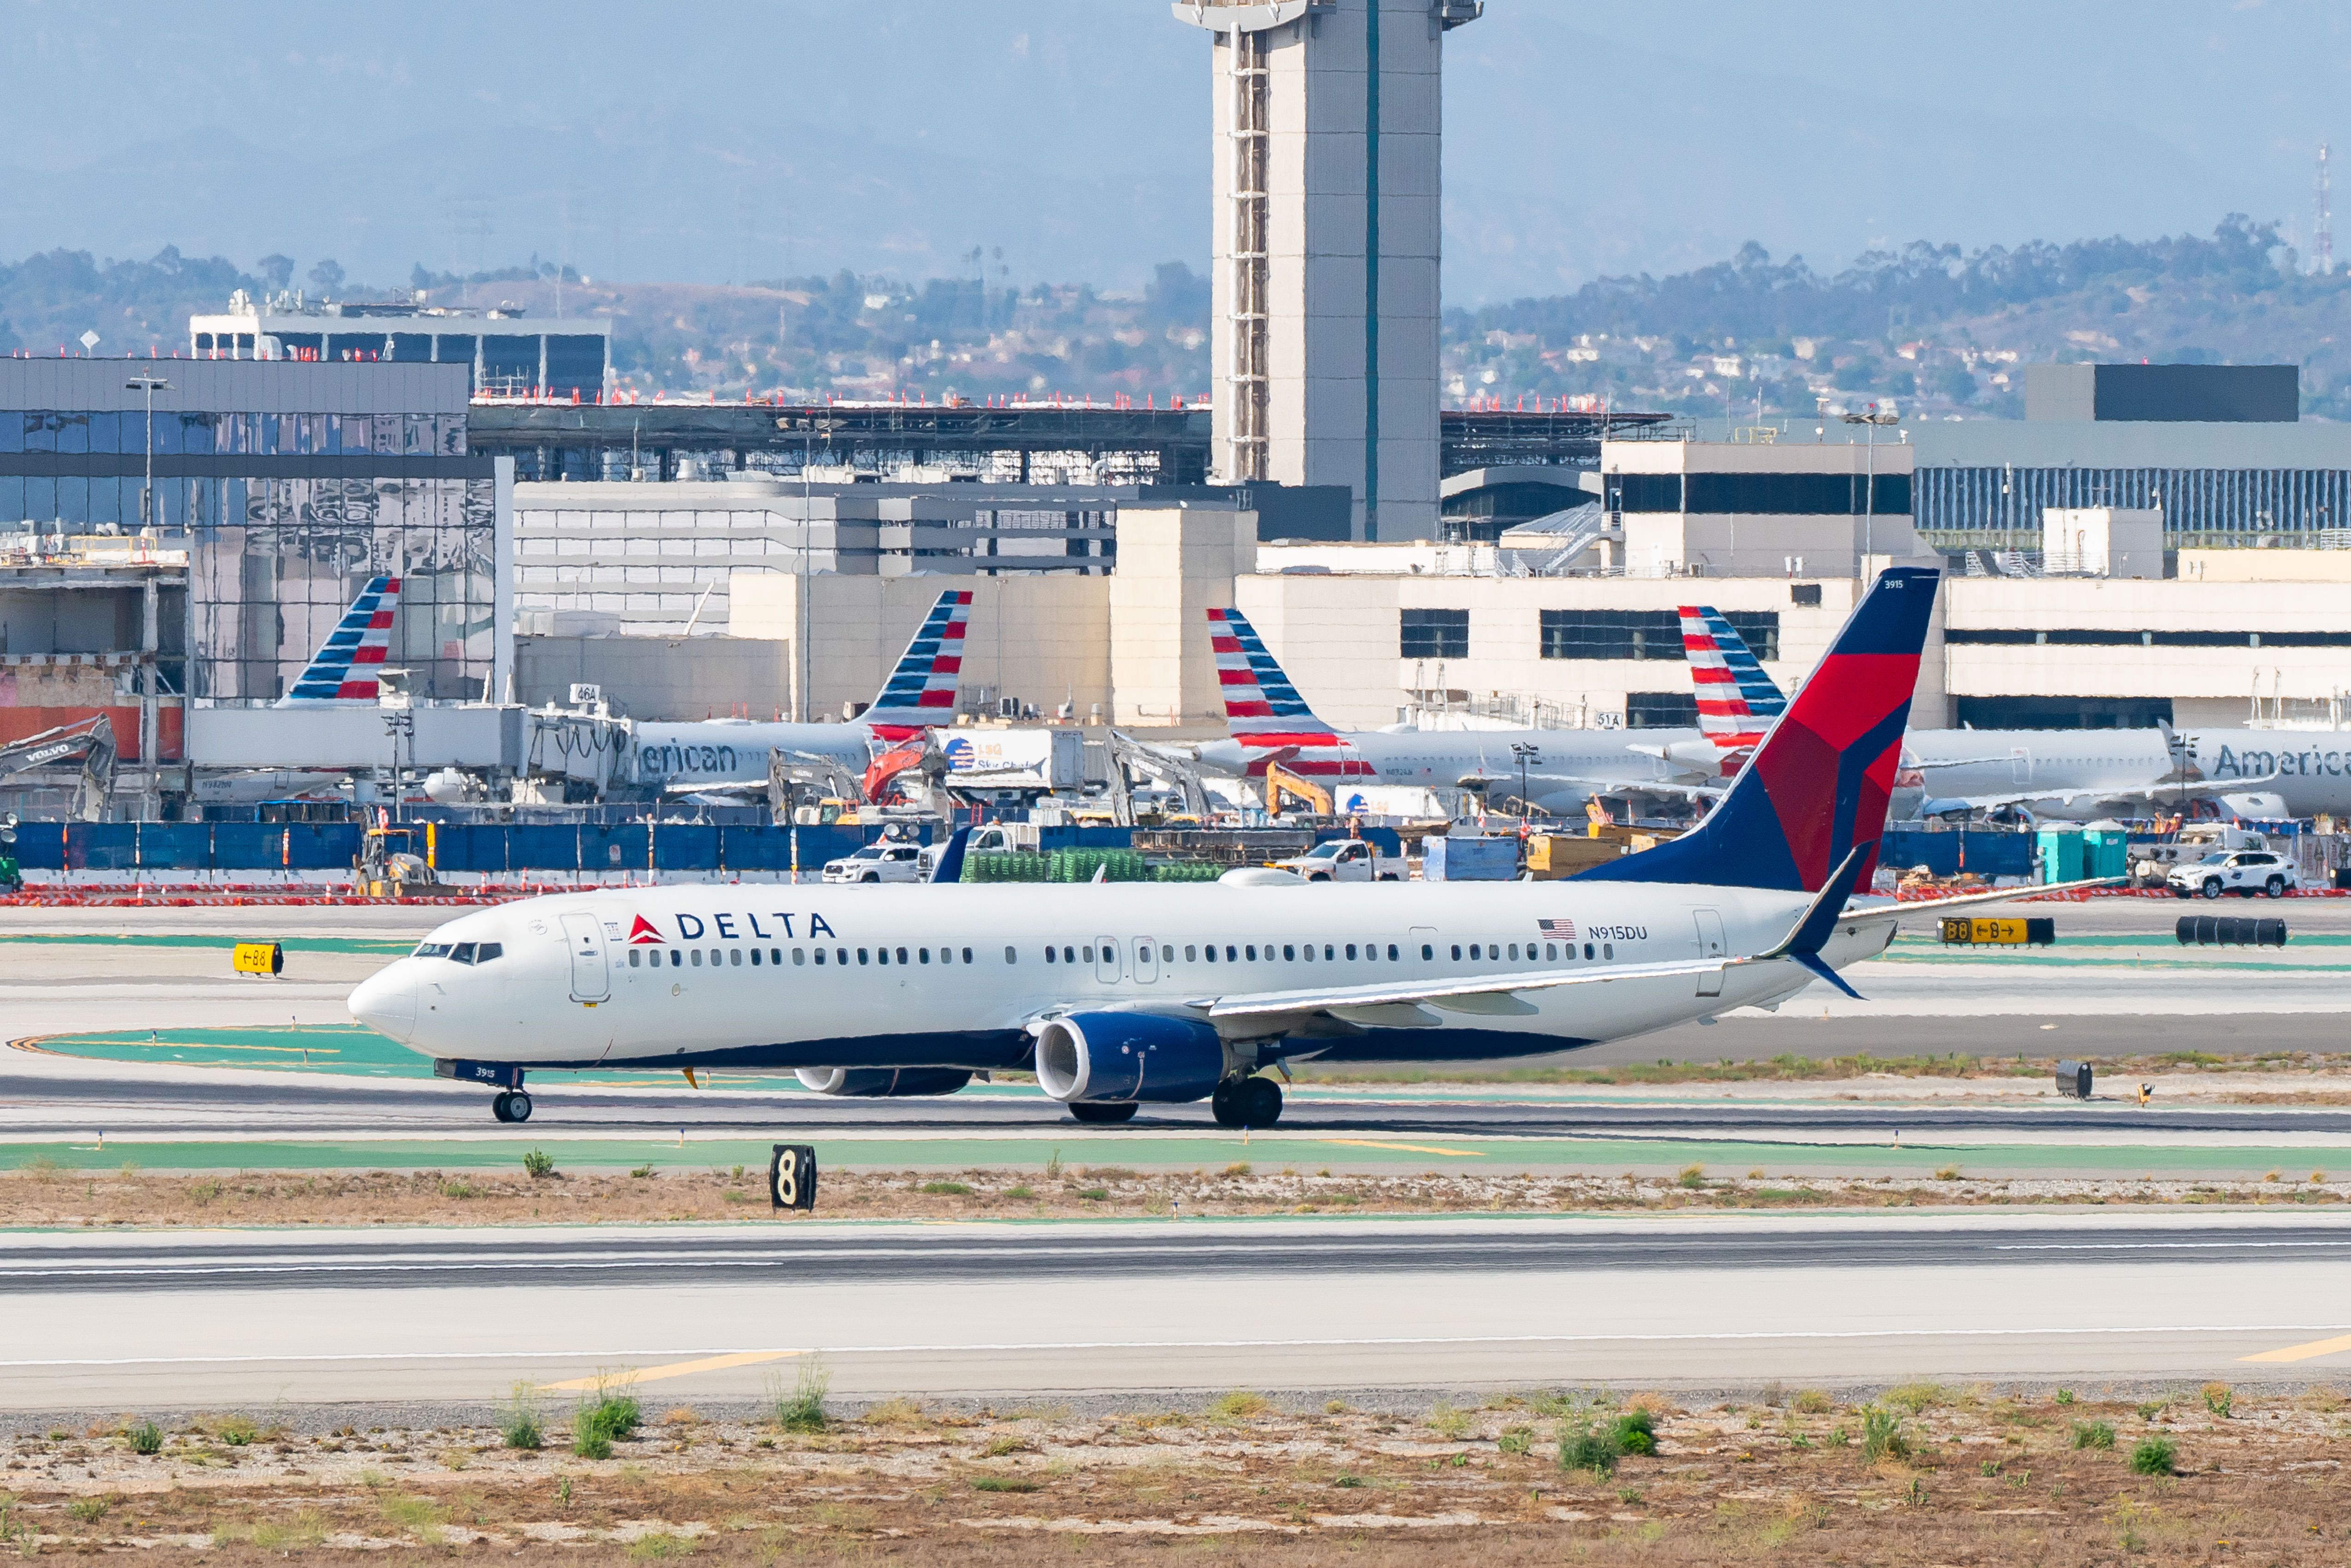 American Airlines & Delta Air Lines at Los Angeles International Airport